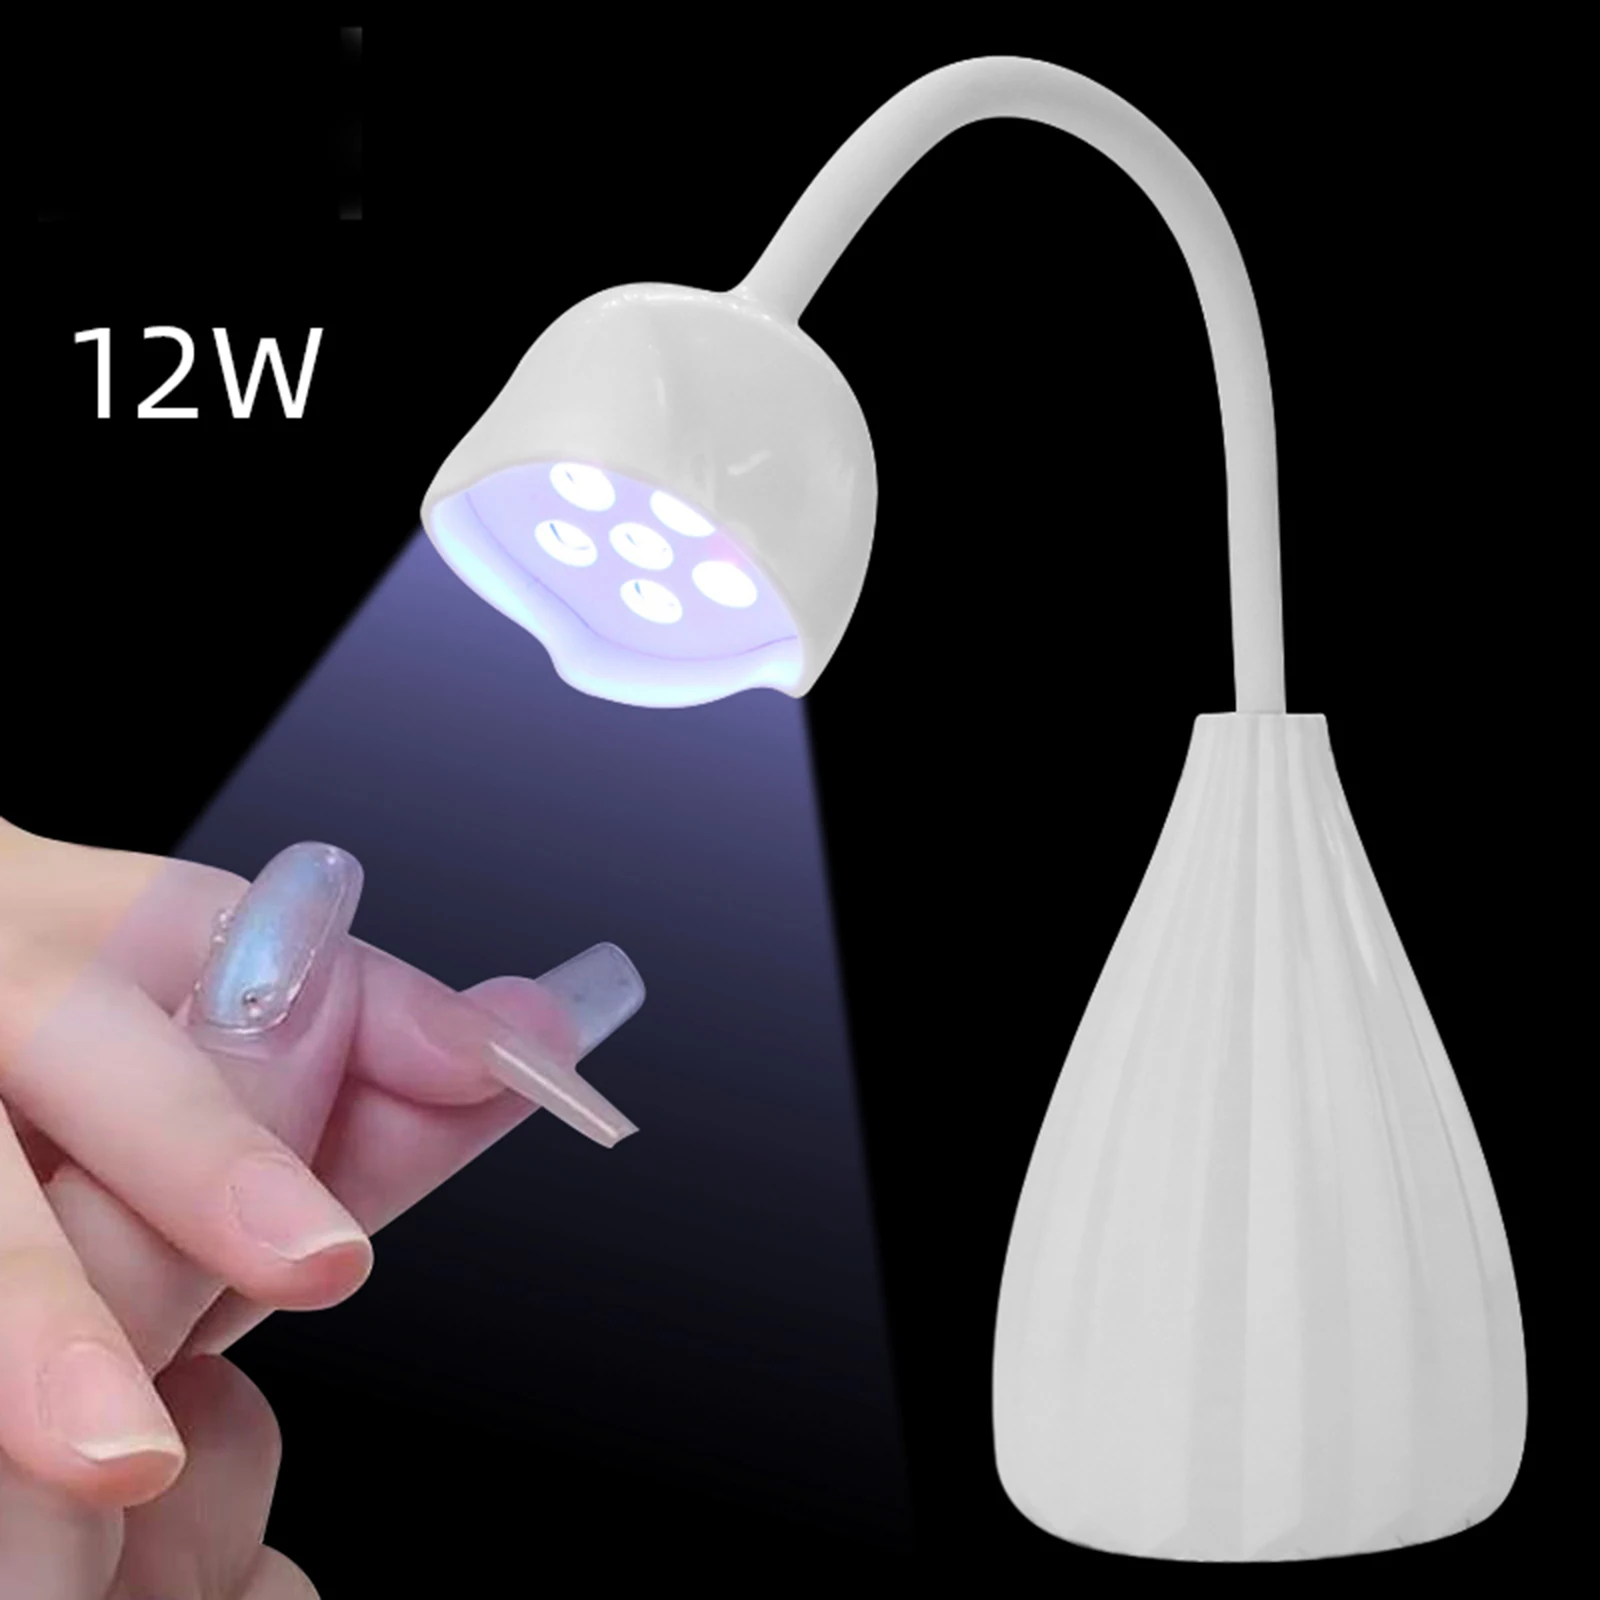 LED Nail Dryer Nail Light Nail Lamp Tools Supplies 10 LED USB Charging Beauty Accessories for Salon Nail Art Home Girls Women images - 6